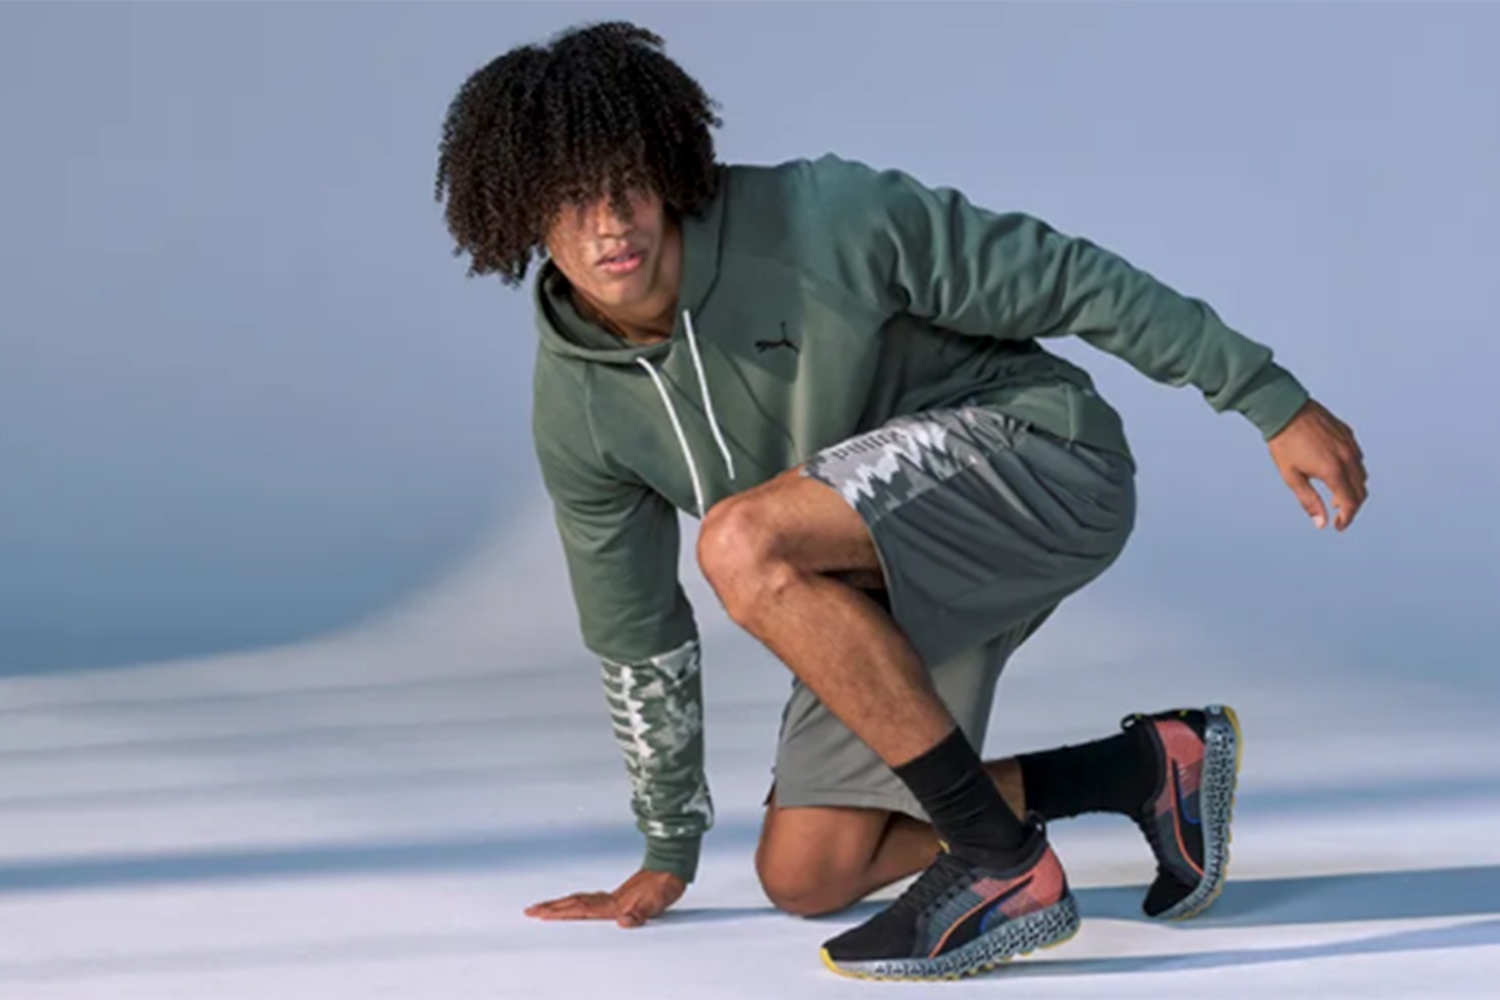 10 men's workout essentials from Oliver's Apparel